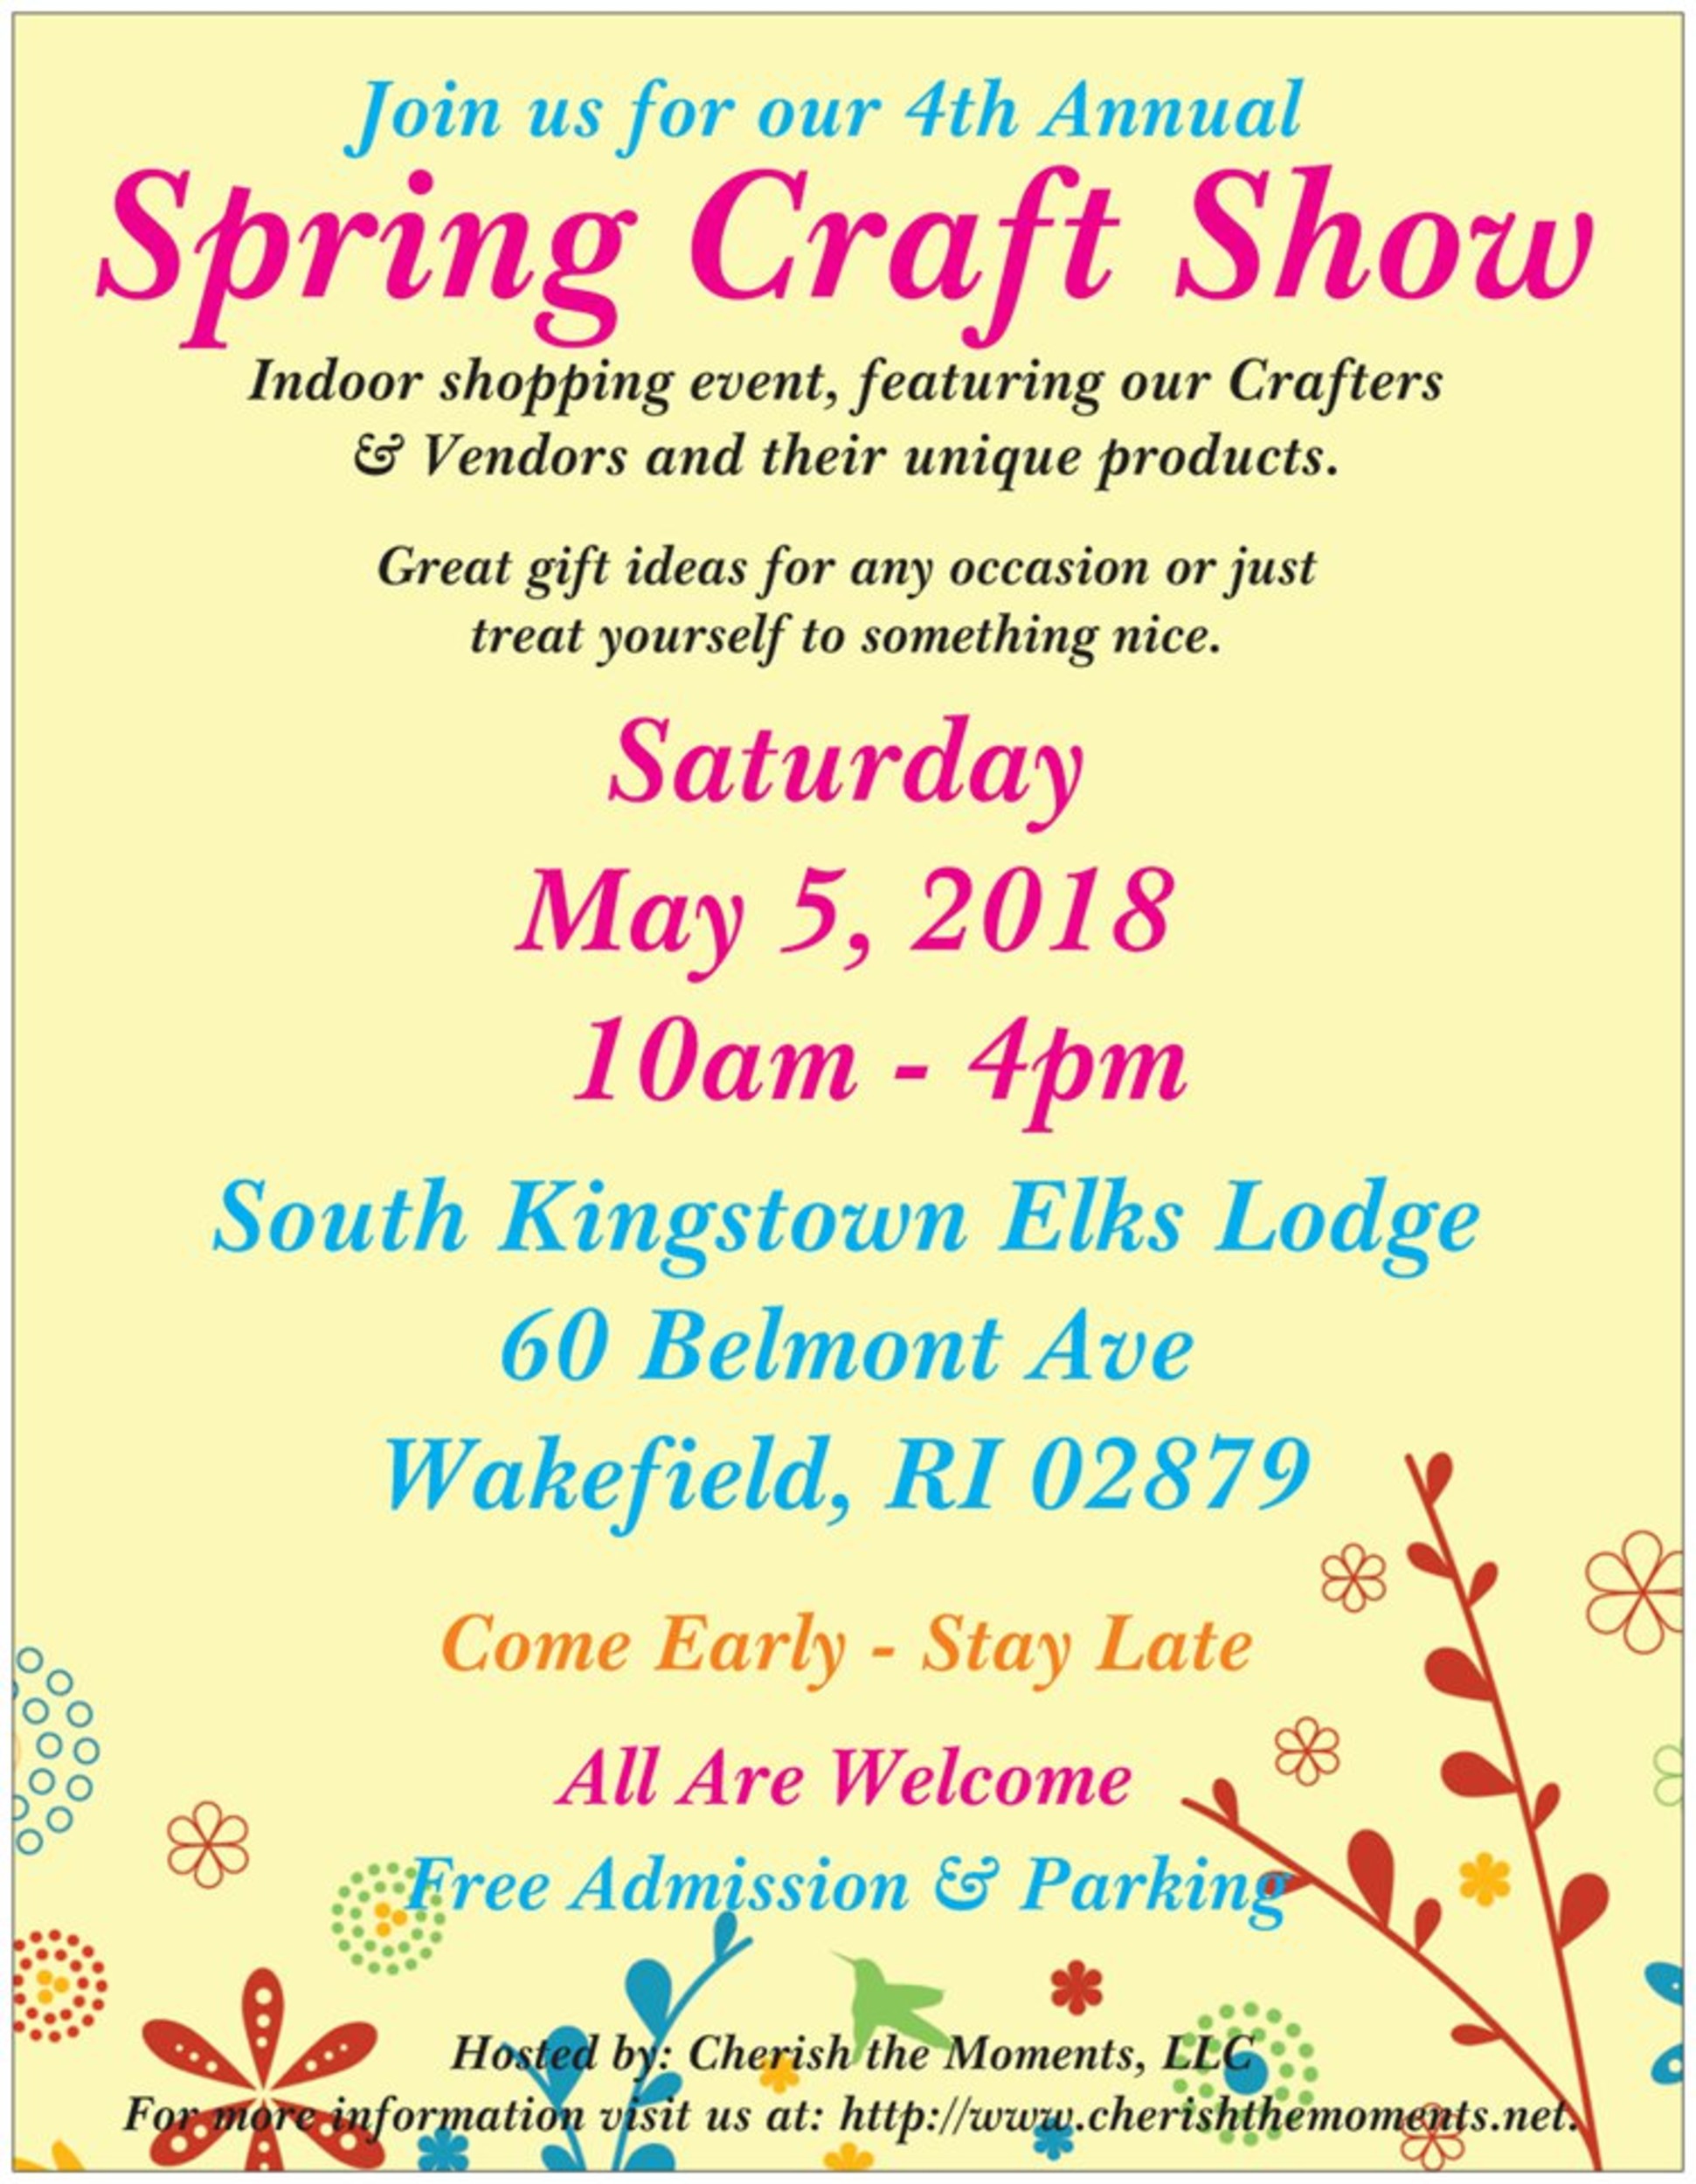 Spring Craft Show News, Opinion, Things to Do in the